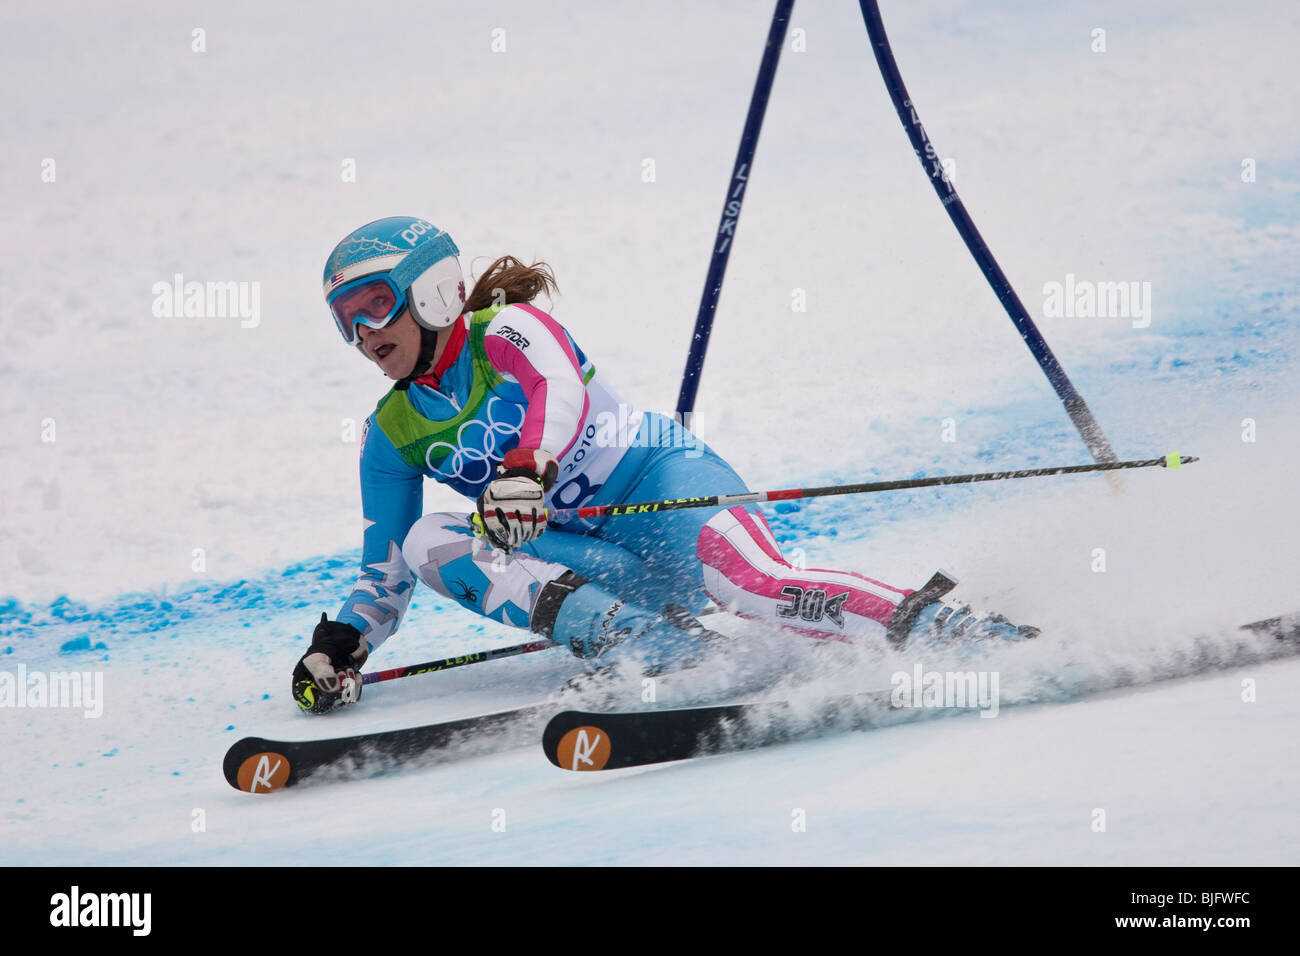 Julia Mancuso (USA) competing in the Alpine Skiing Women's Giant Slalom event at the 2010 Olympic Winter Games Stock Photo